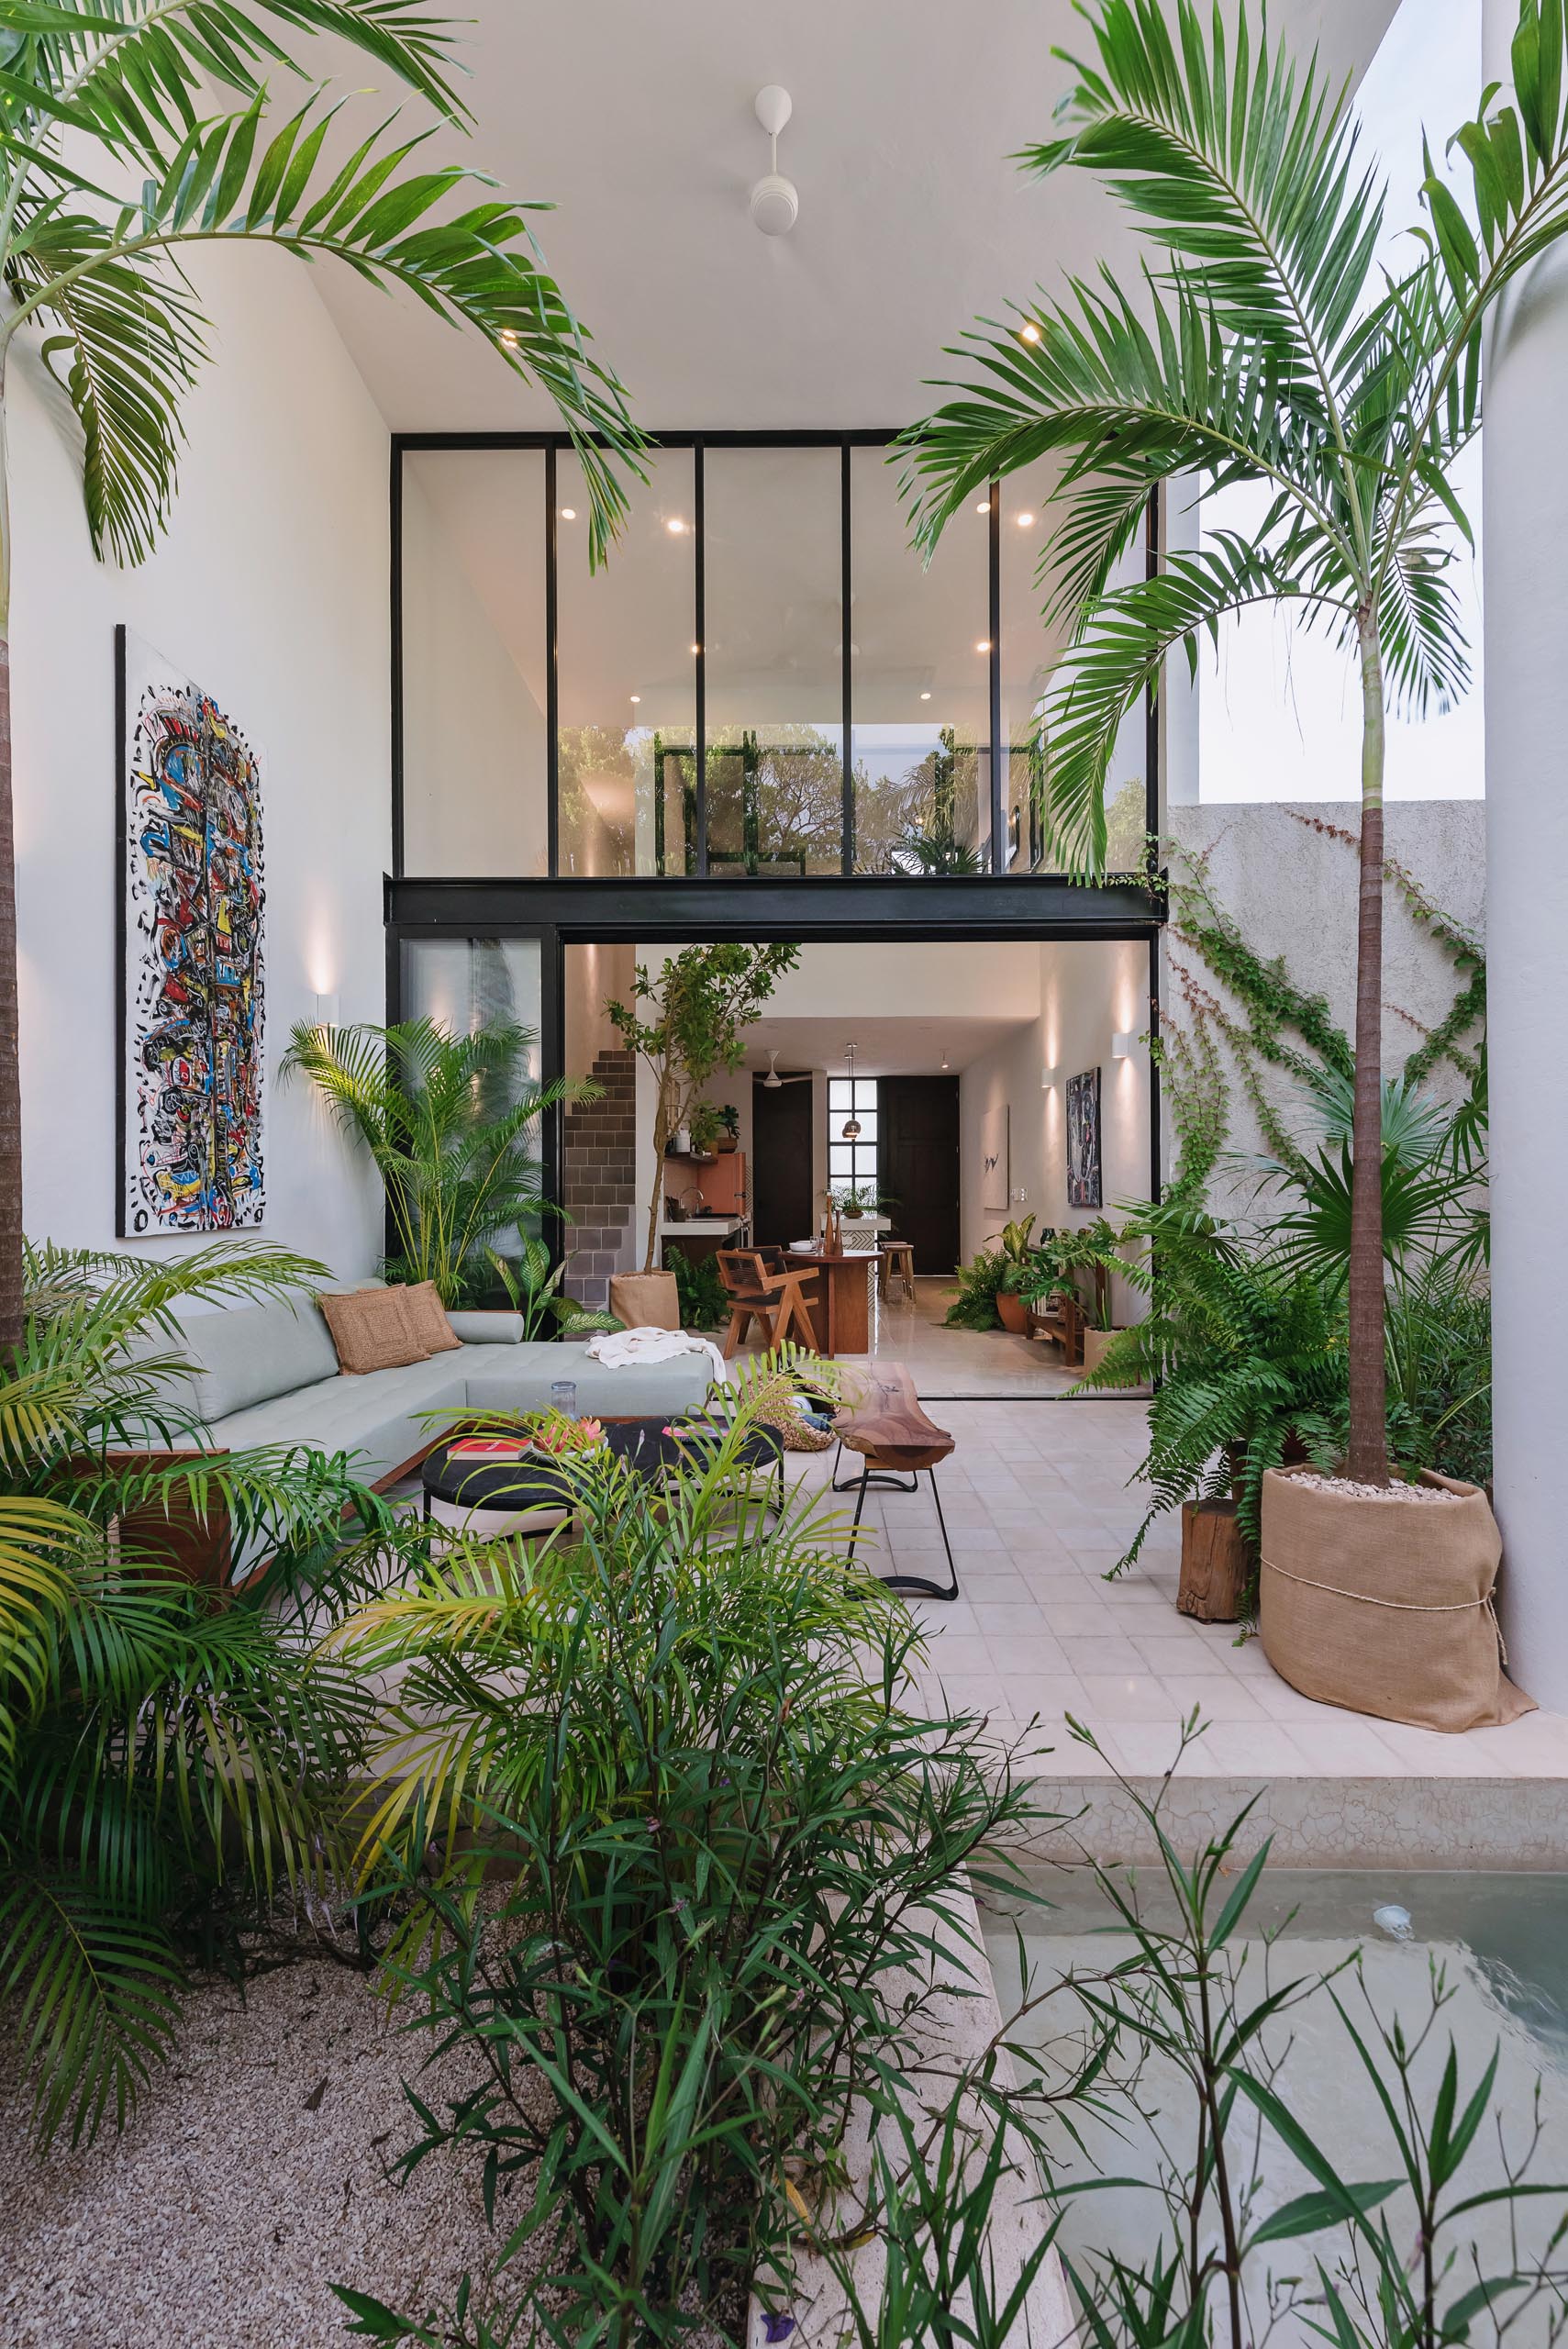 An outdoor living room with a comfortable sofa, a hammock surrounded by tropical plants, and a small swimming pool.